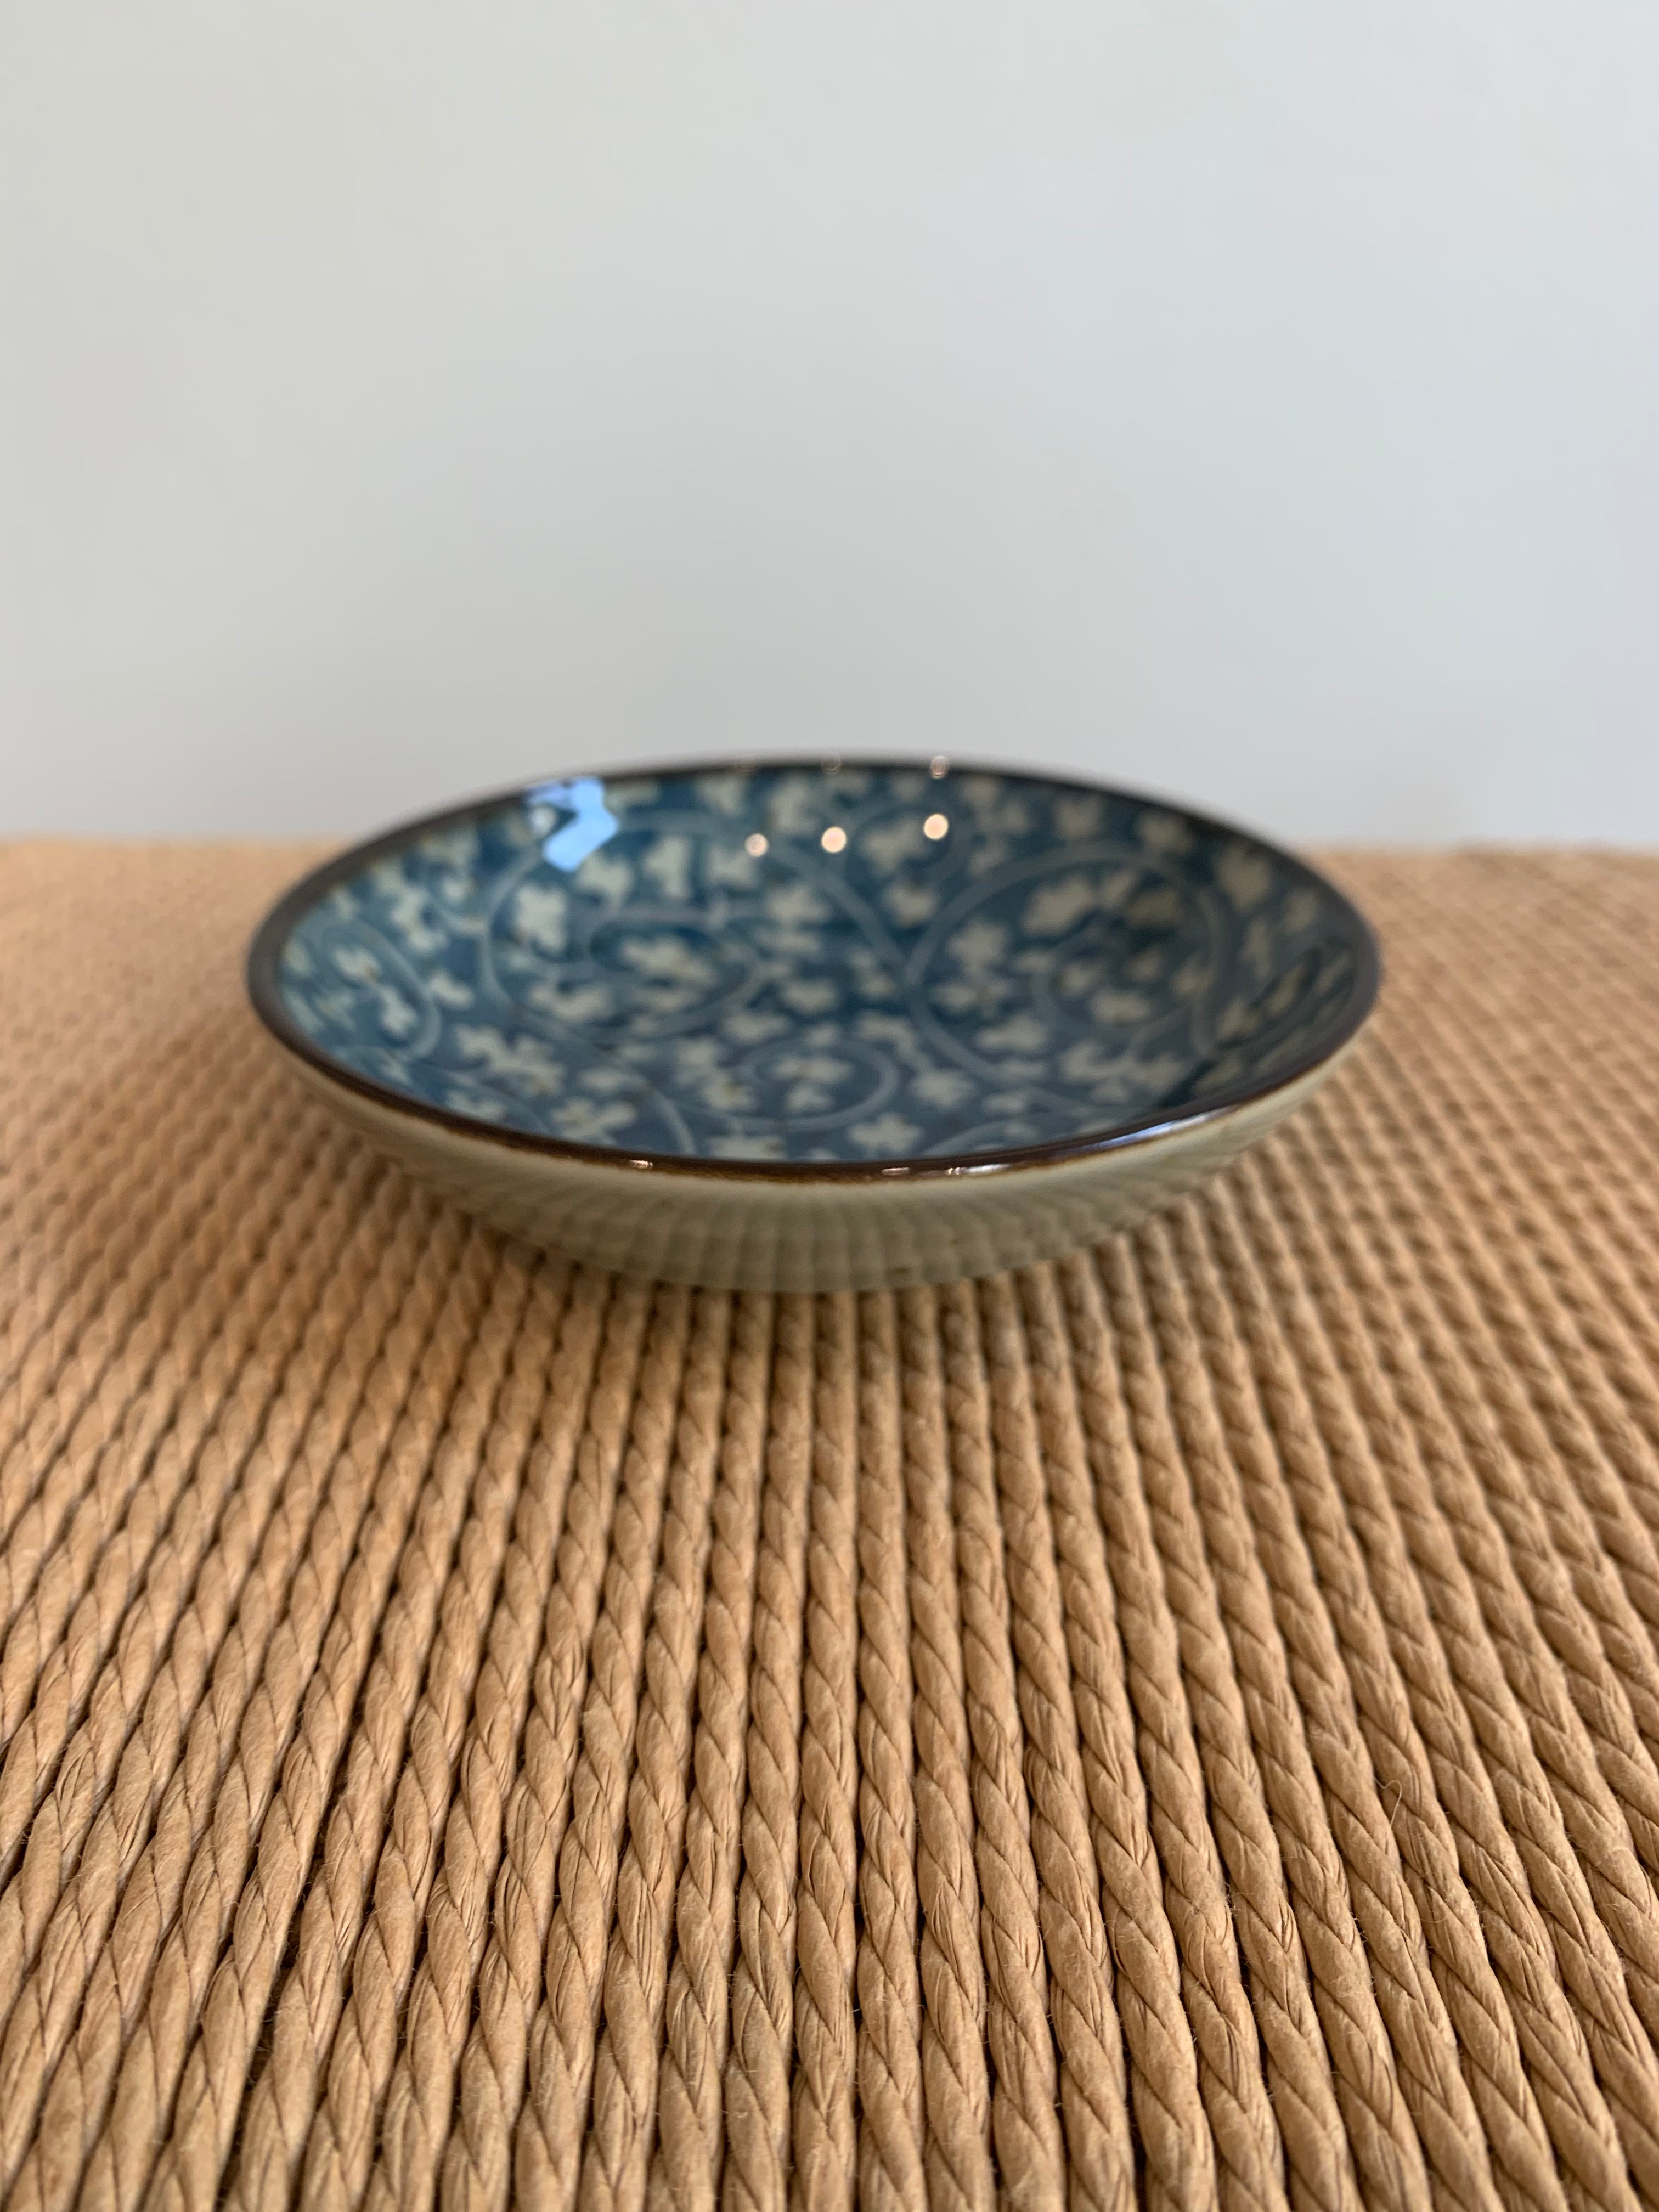 Soy bowl with floral motif